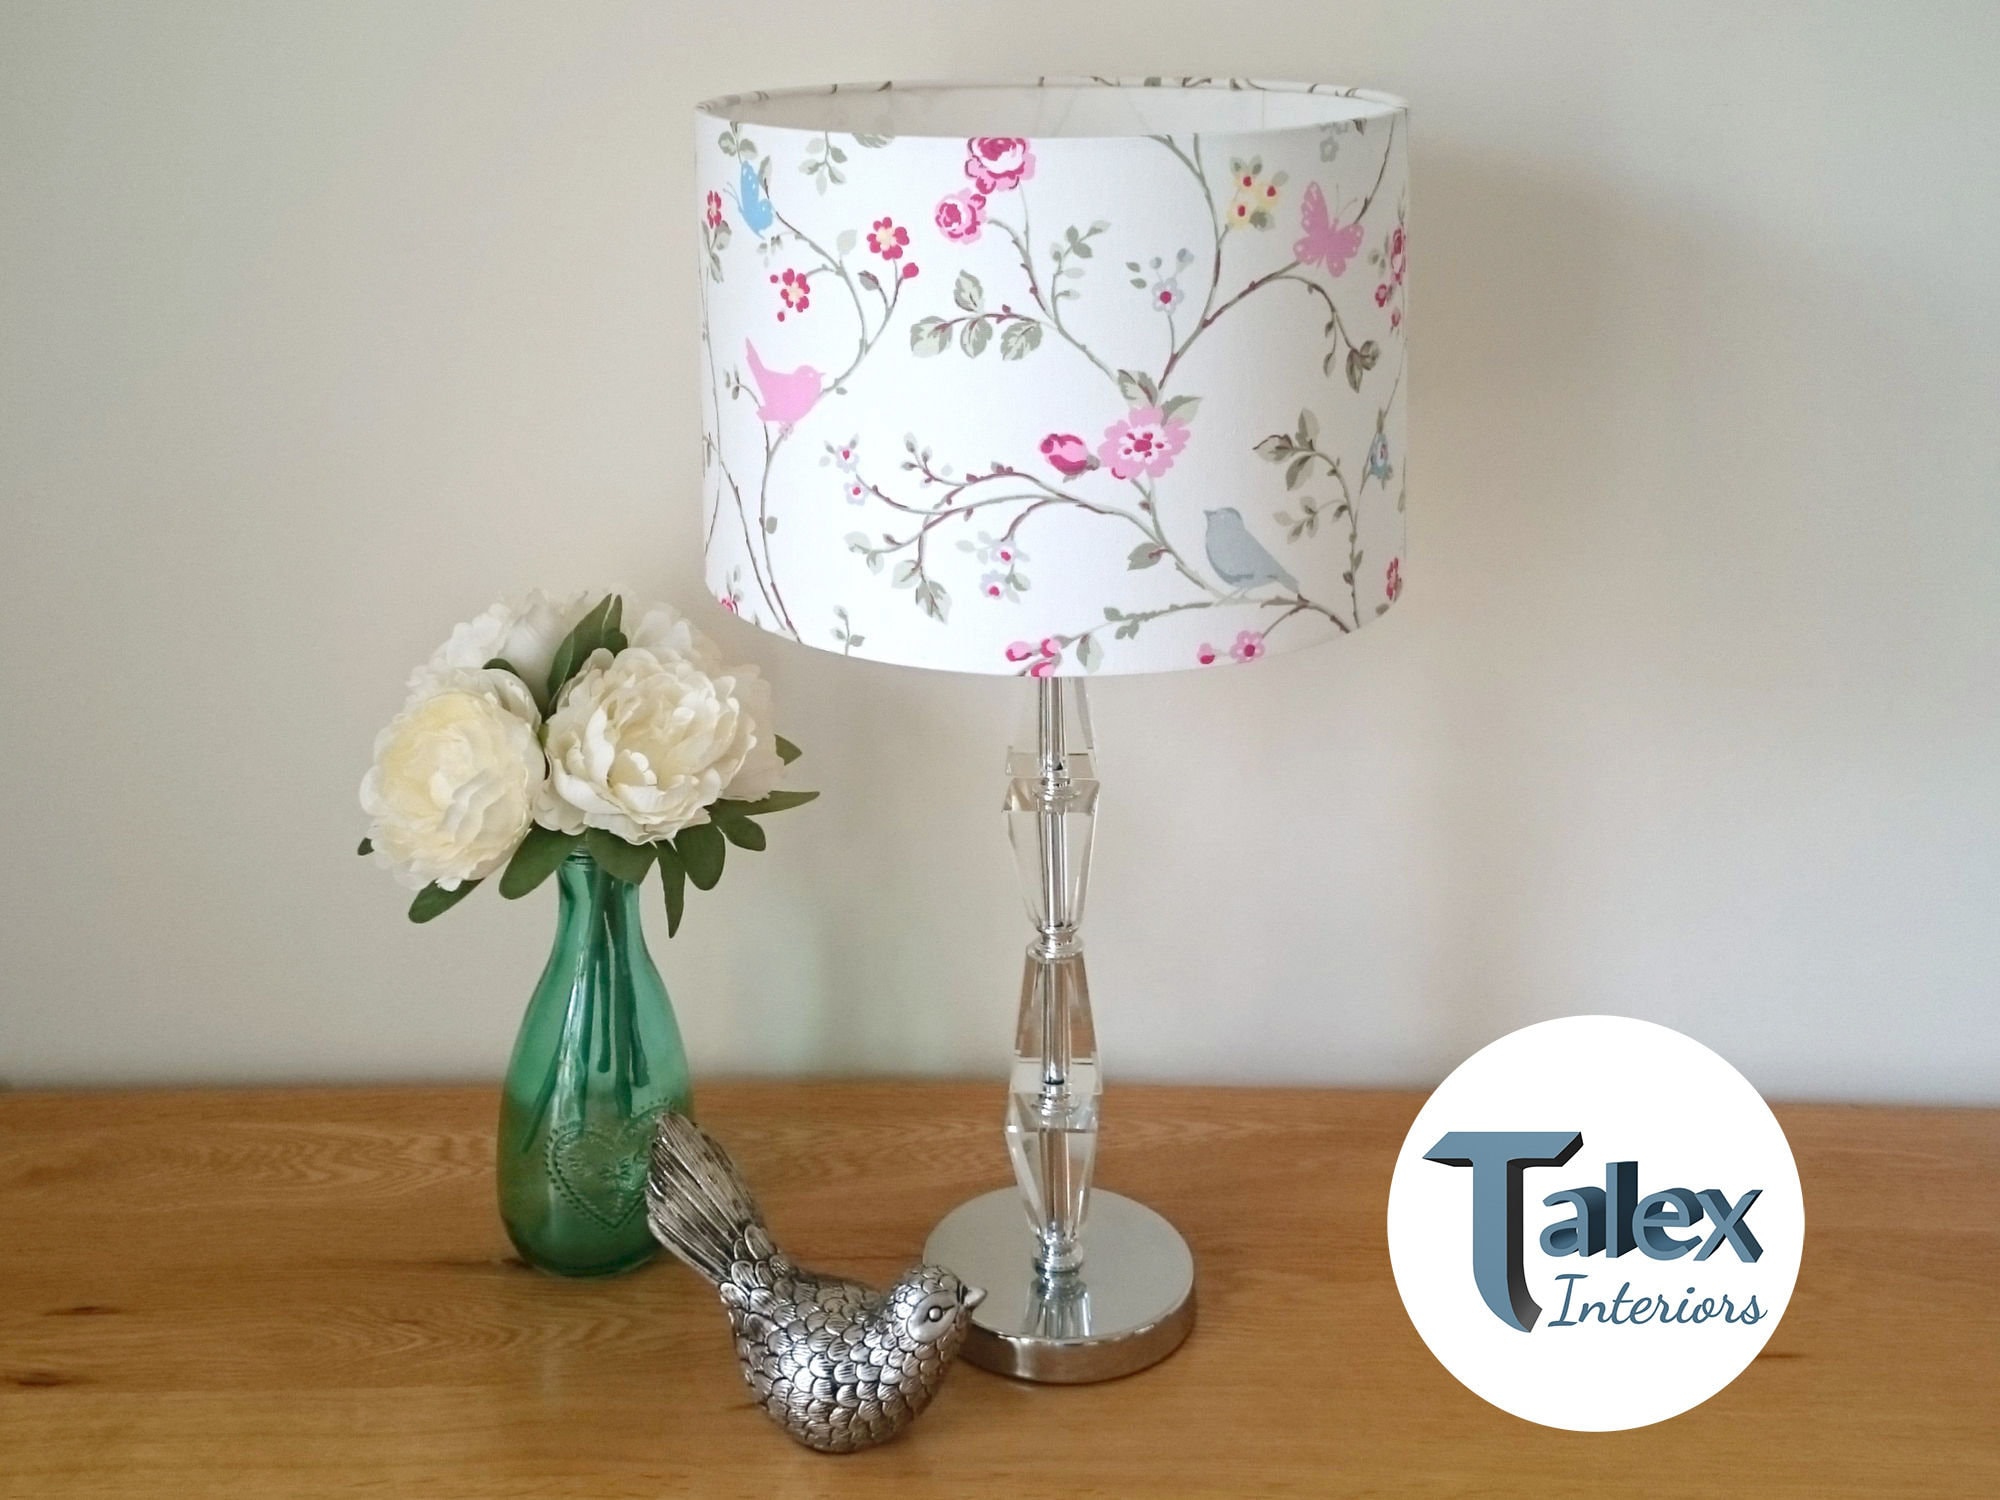 Daisy Pink Floral Pretty Vintage Shabby Chic Drum Lampshade